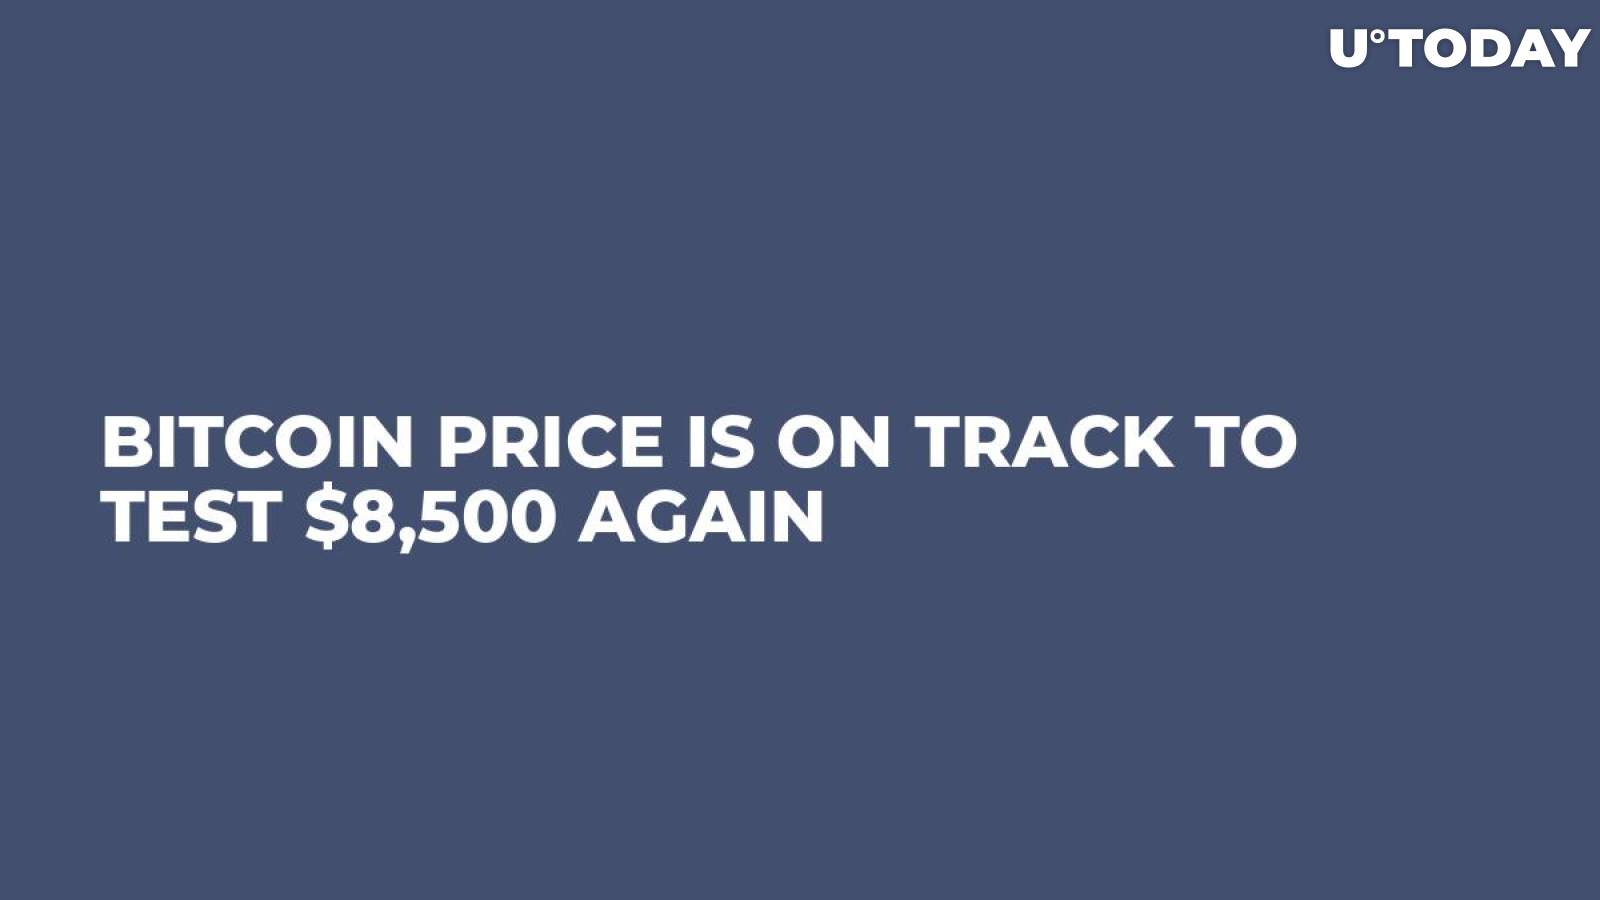 Bitcoin Price Is on Track to Test $8,500 Again